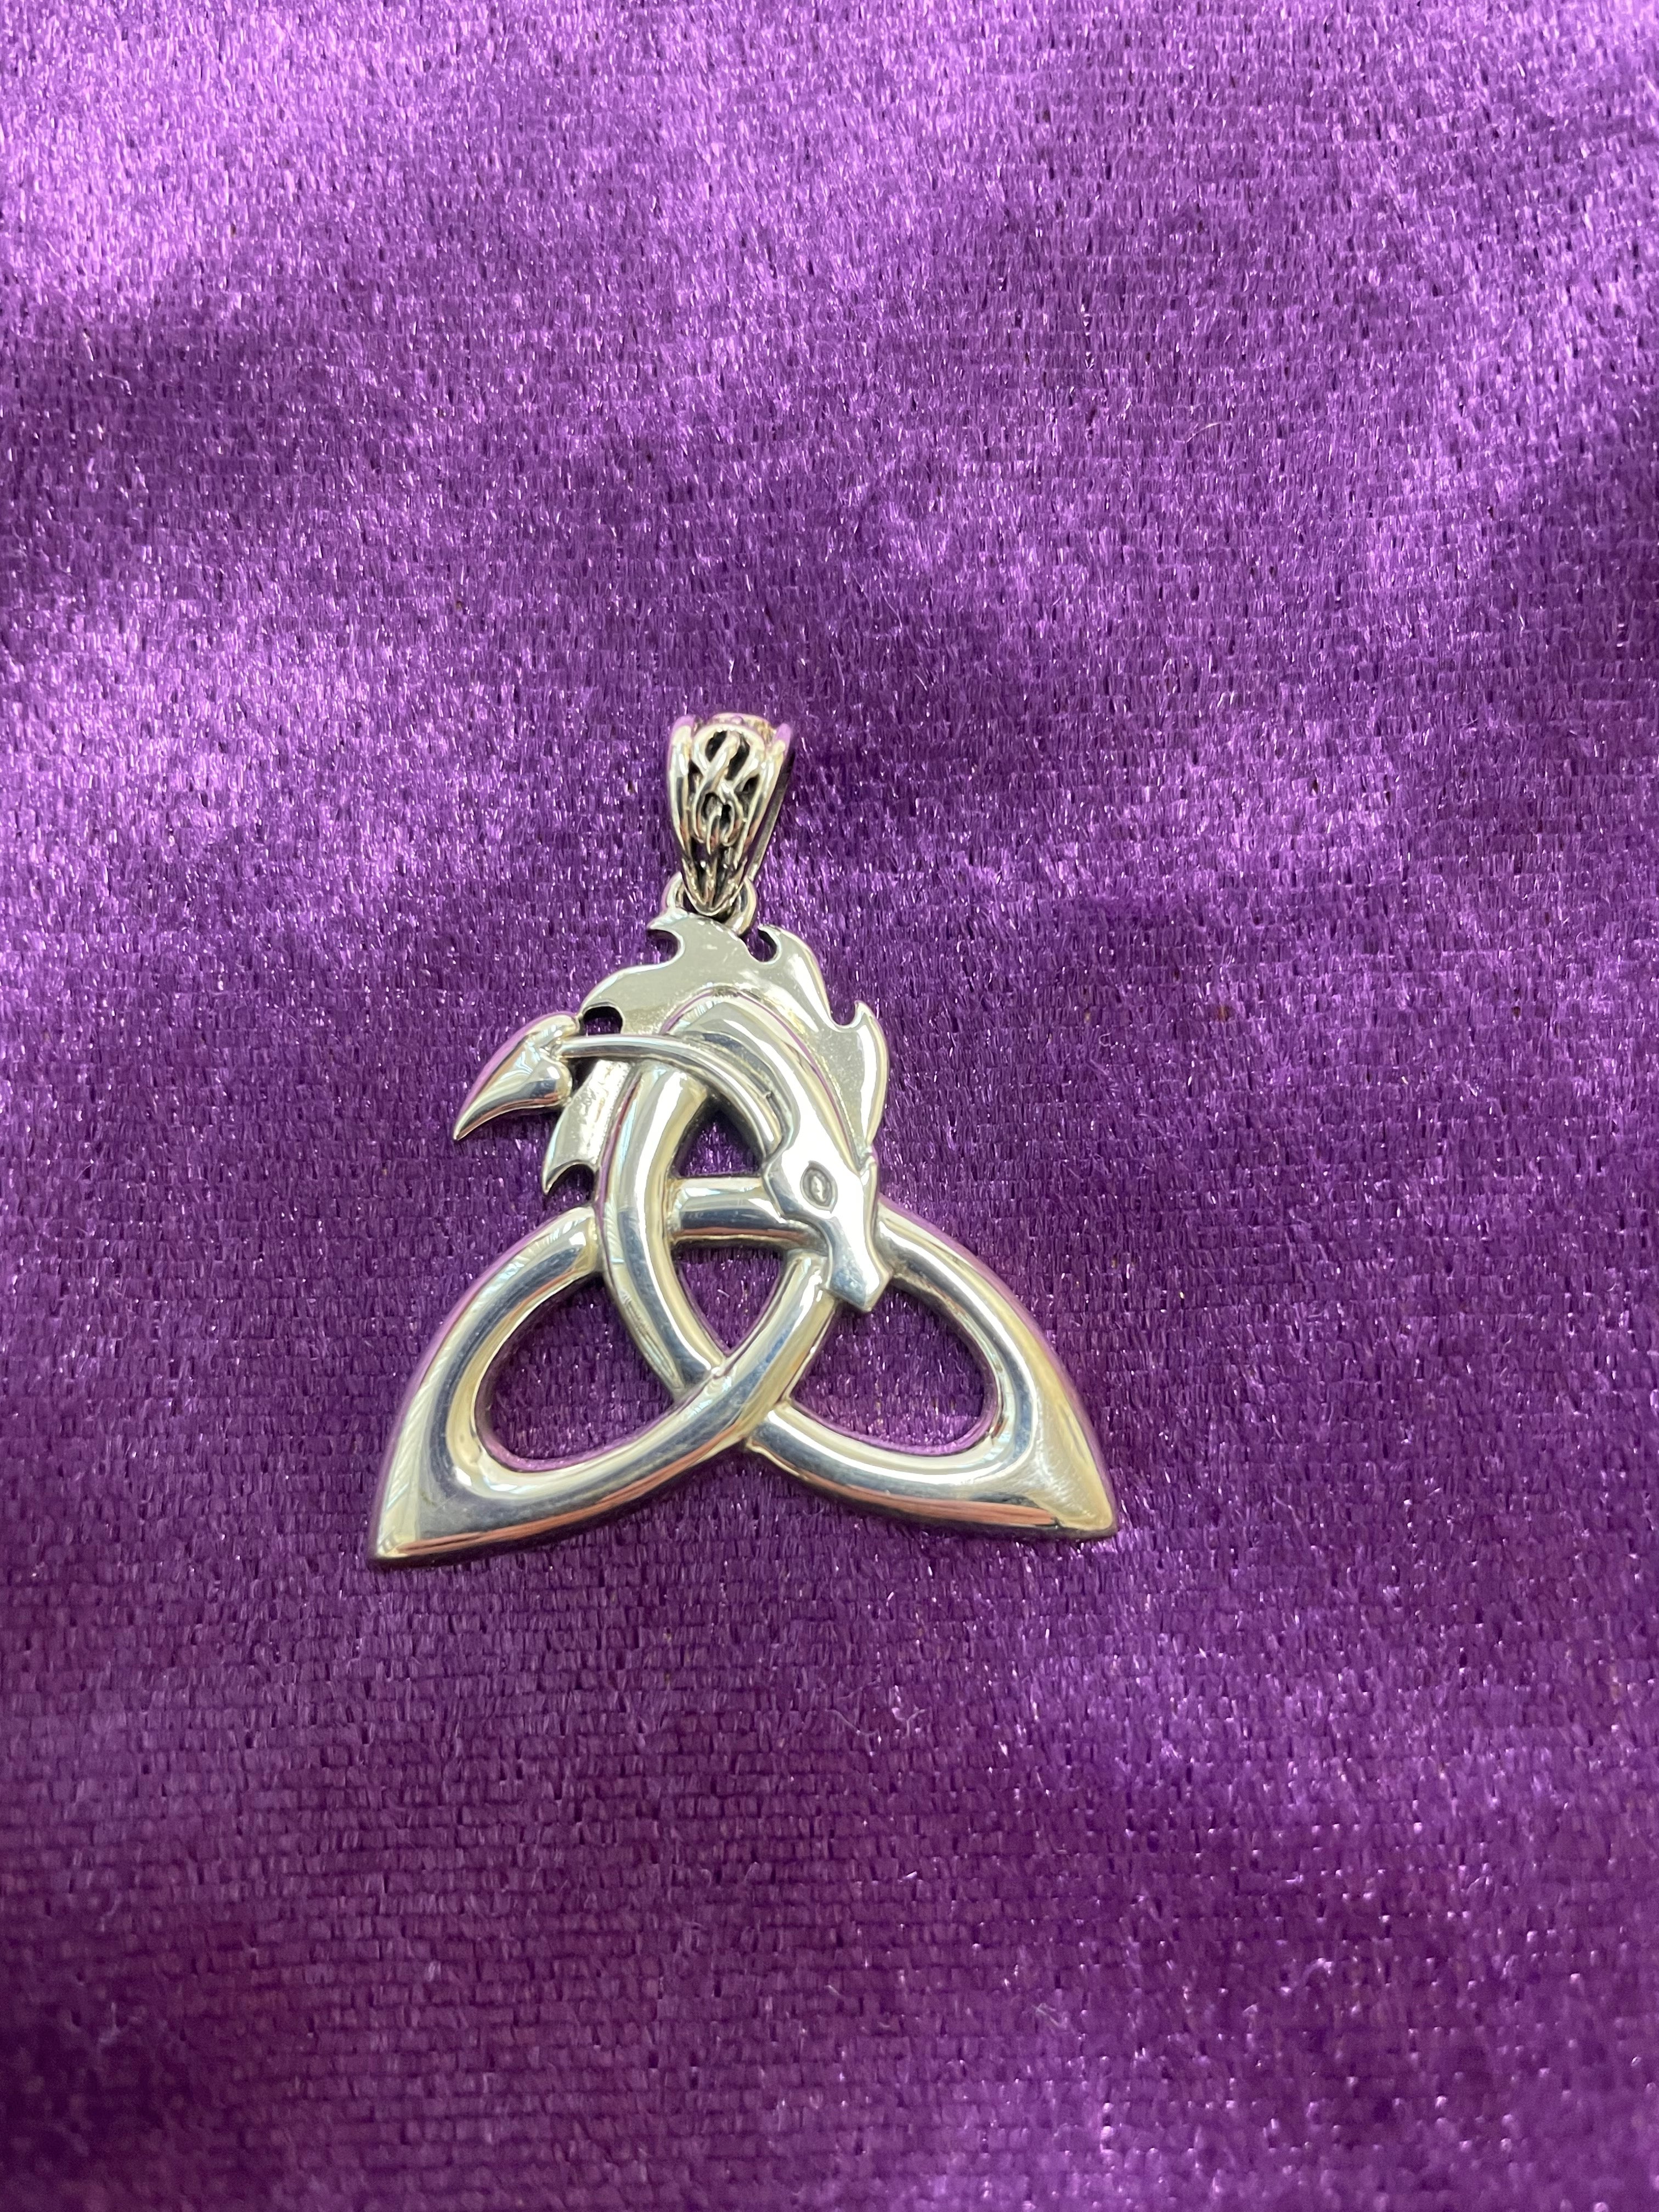 Another view of  the stunning sterling silver dragon pendant forming a Celtic triquetra or trinity knot with a Celtic design on the bail. Approximately 1¼" without bail, 1½" with bail. Cost is $34.98.